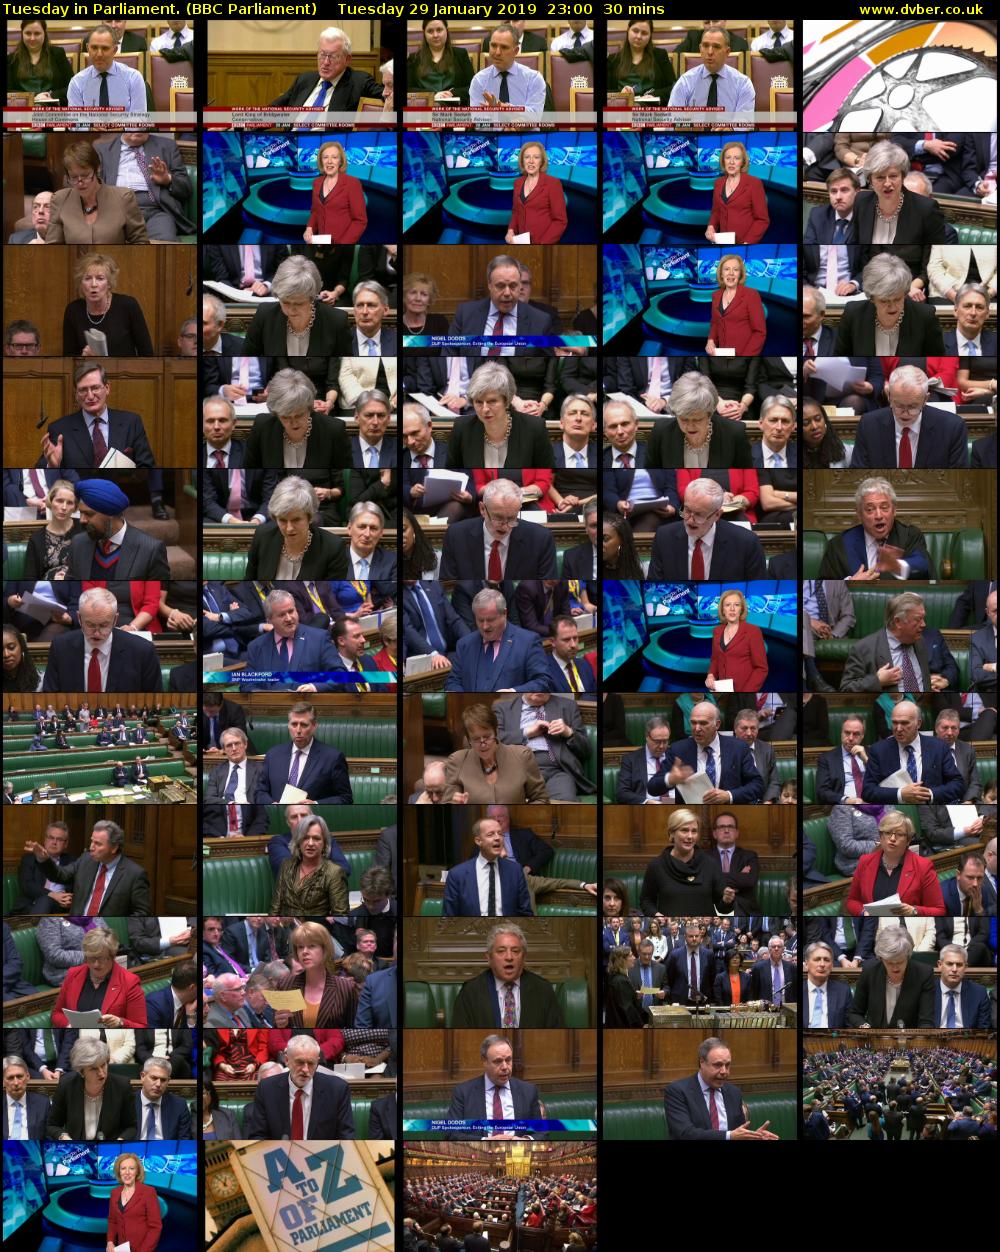 Tuesday in Parliament. (BBC Parliament) Tuesday 29 January 2019 23:00 - 23:30